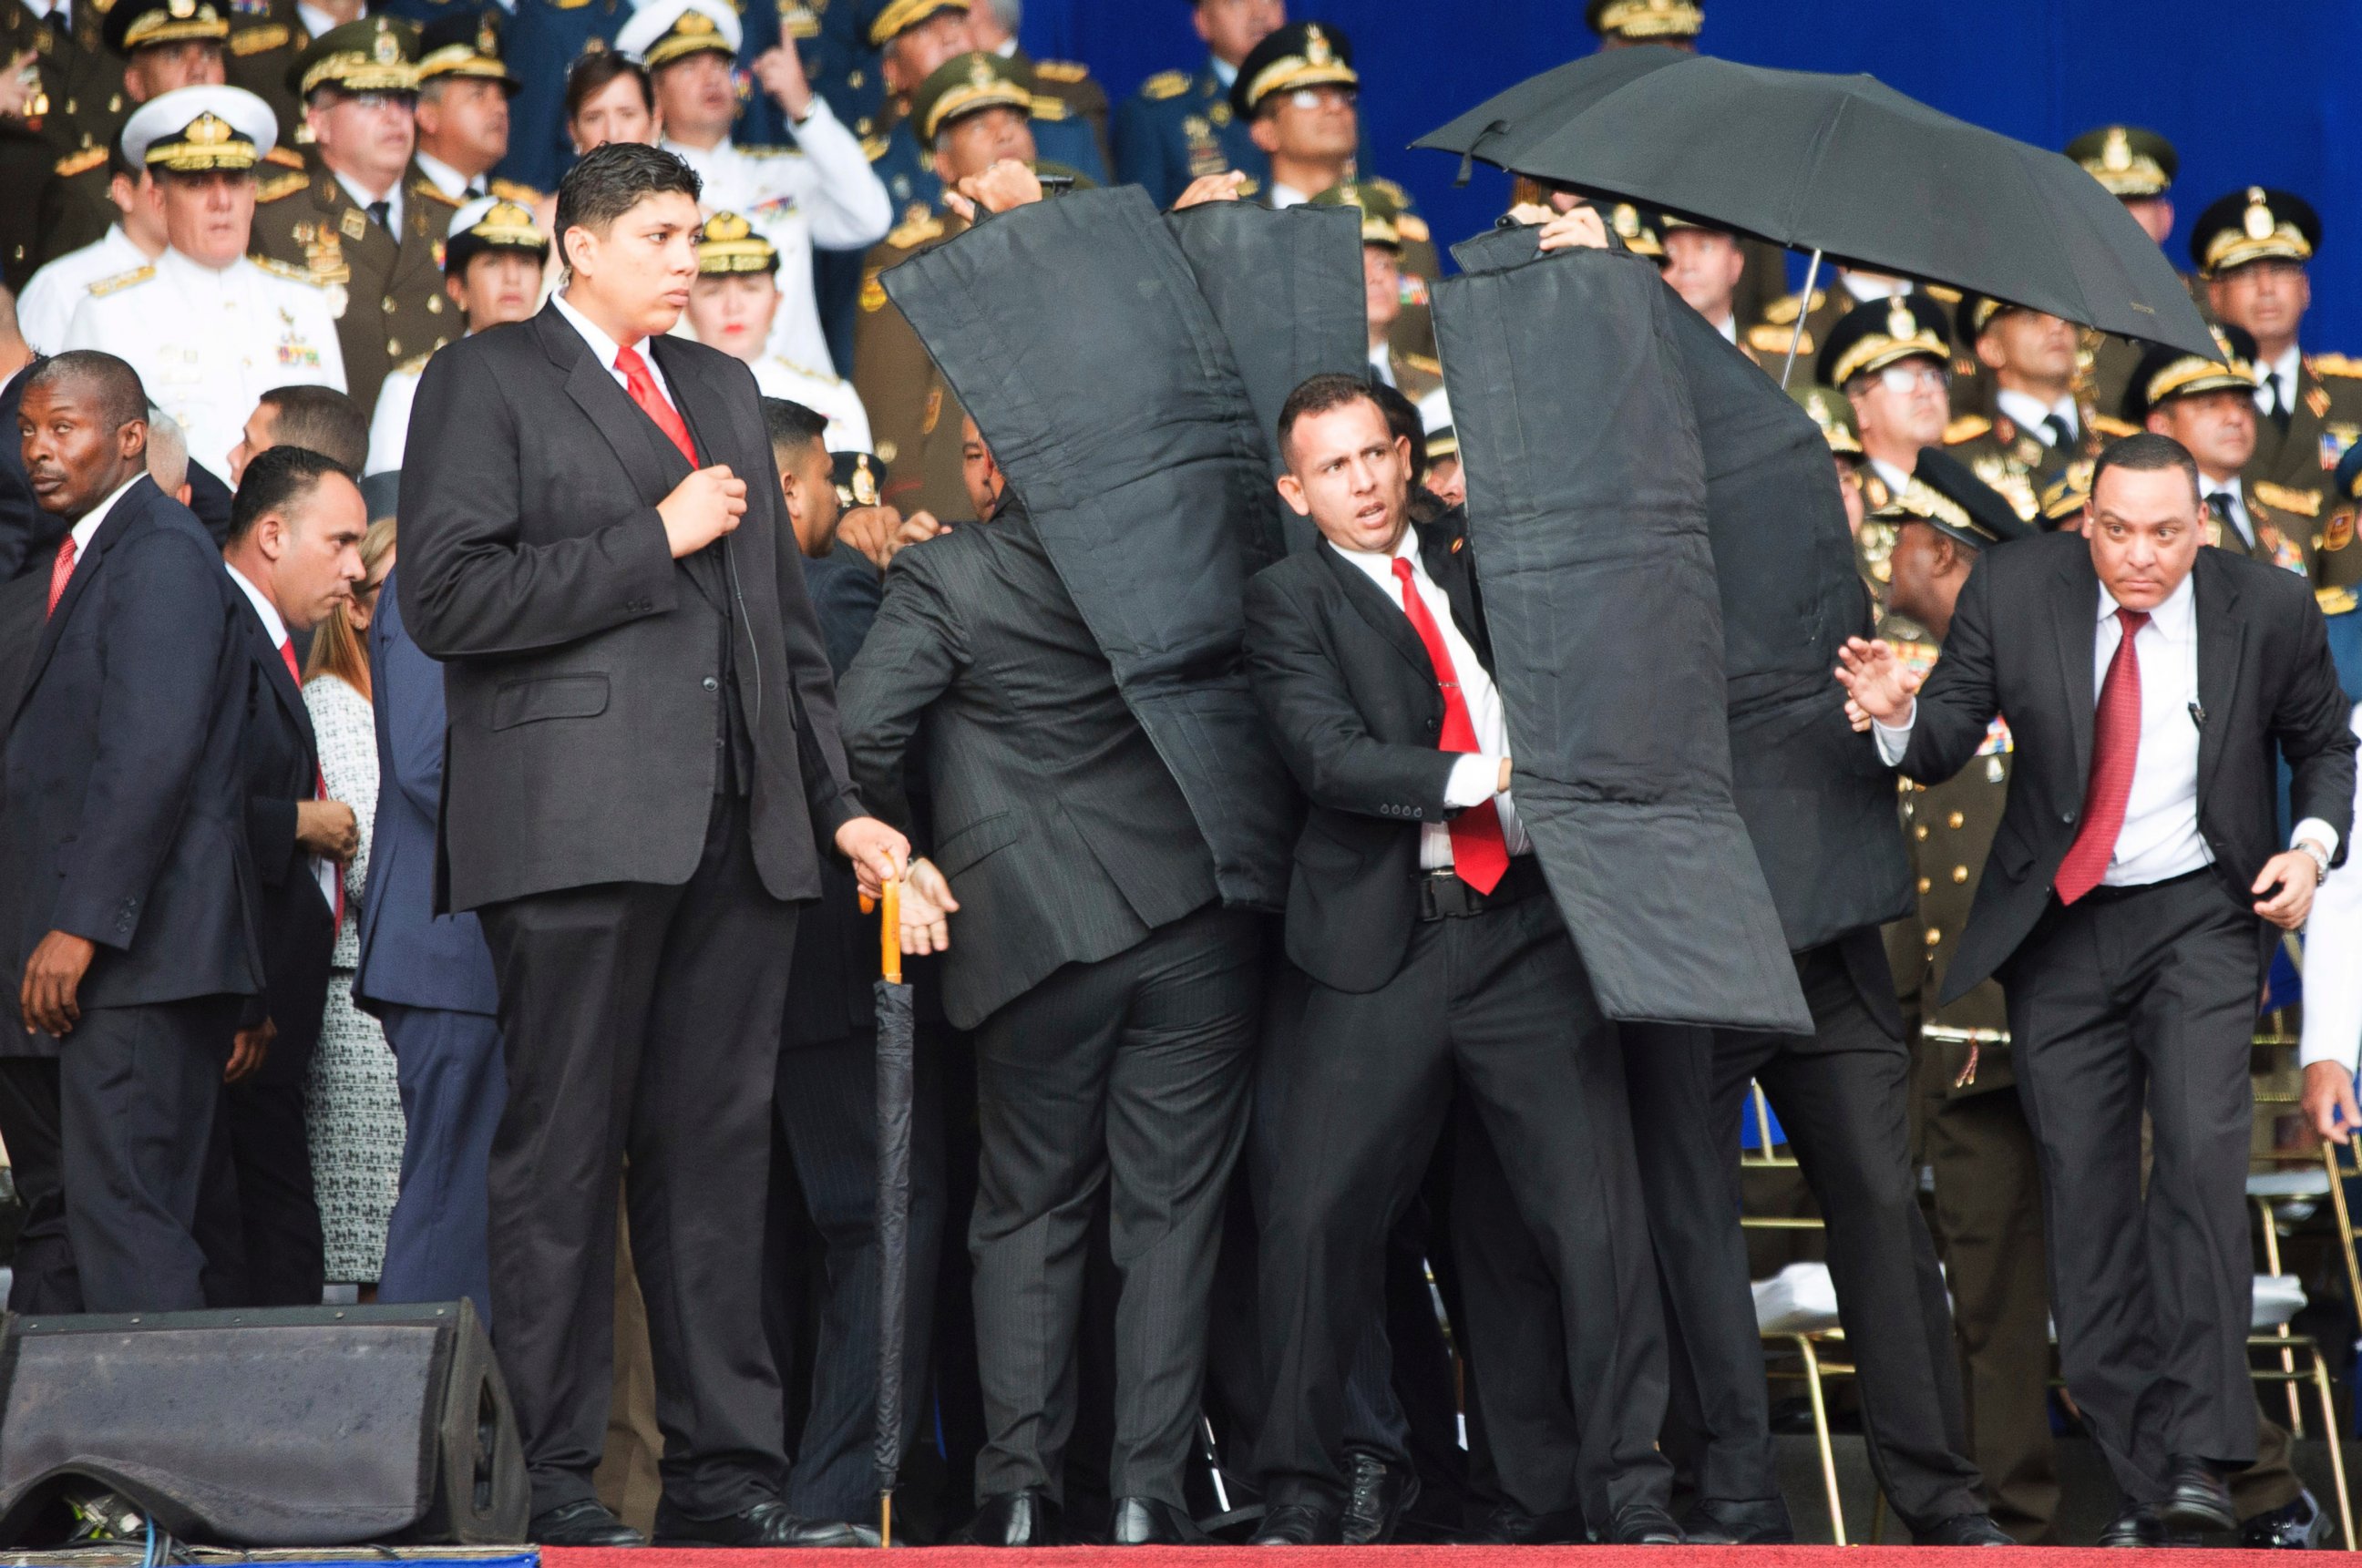 In this photo released by China's Xinhua News Agency, security personnel surround Venezuela's President Nicolas Maduro during an incident as he was giving a speech in Caracas, Venezuela, Saturday, Aug. 4, 2018.